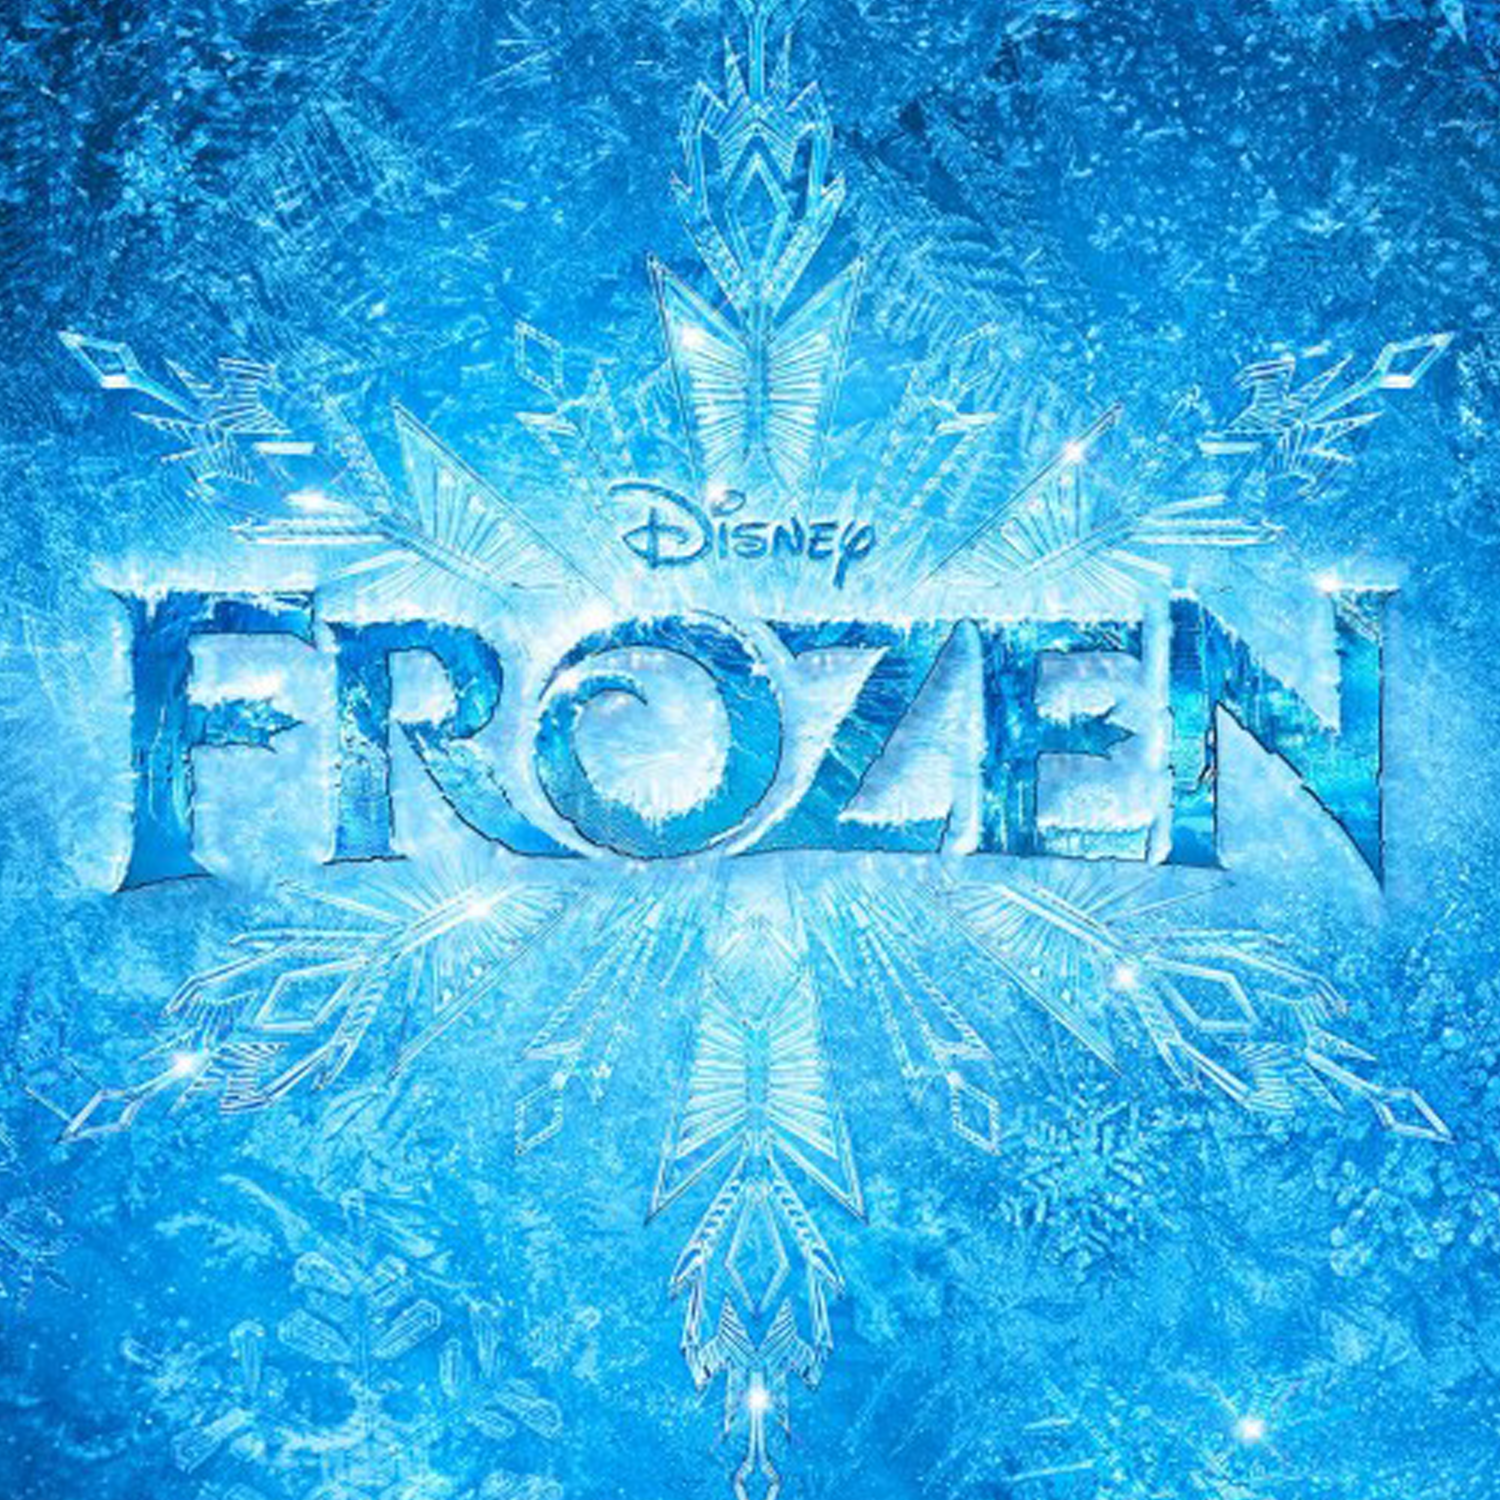 Frozen just might give you the warm fuzzies (2013)